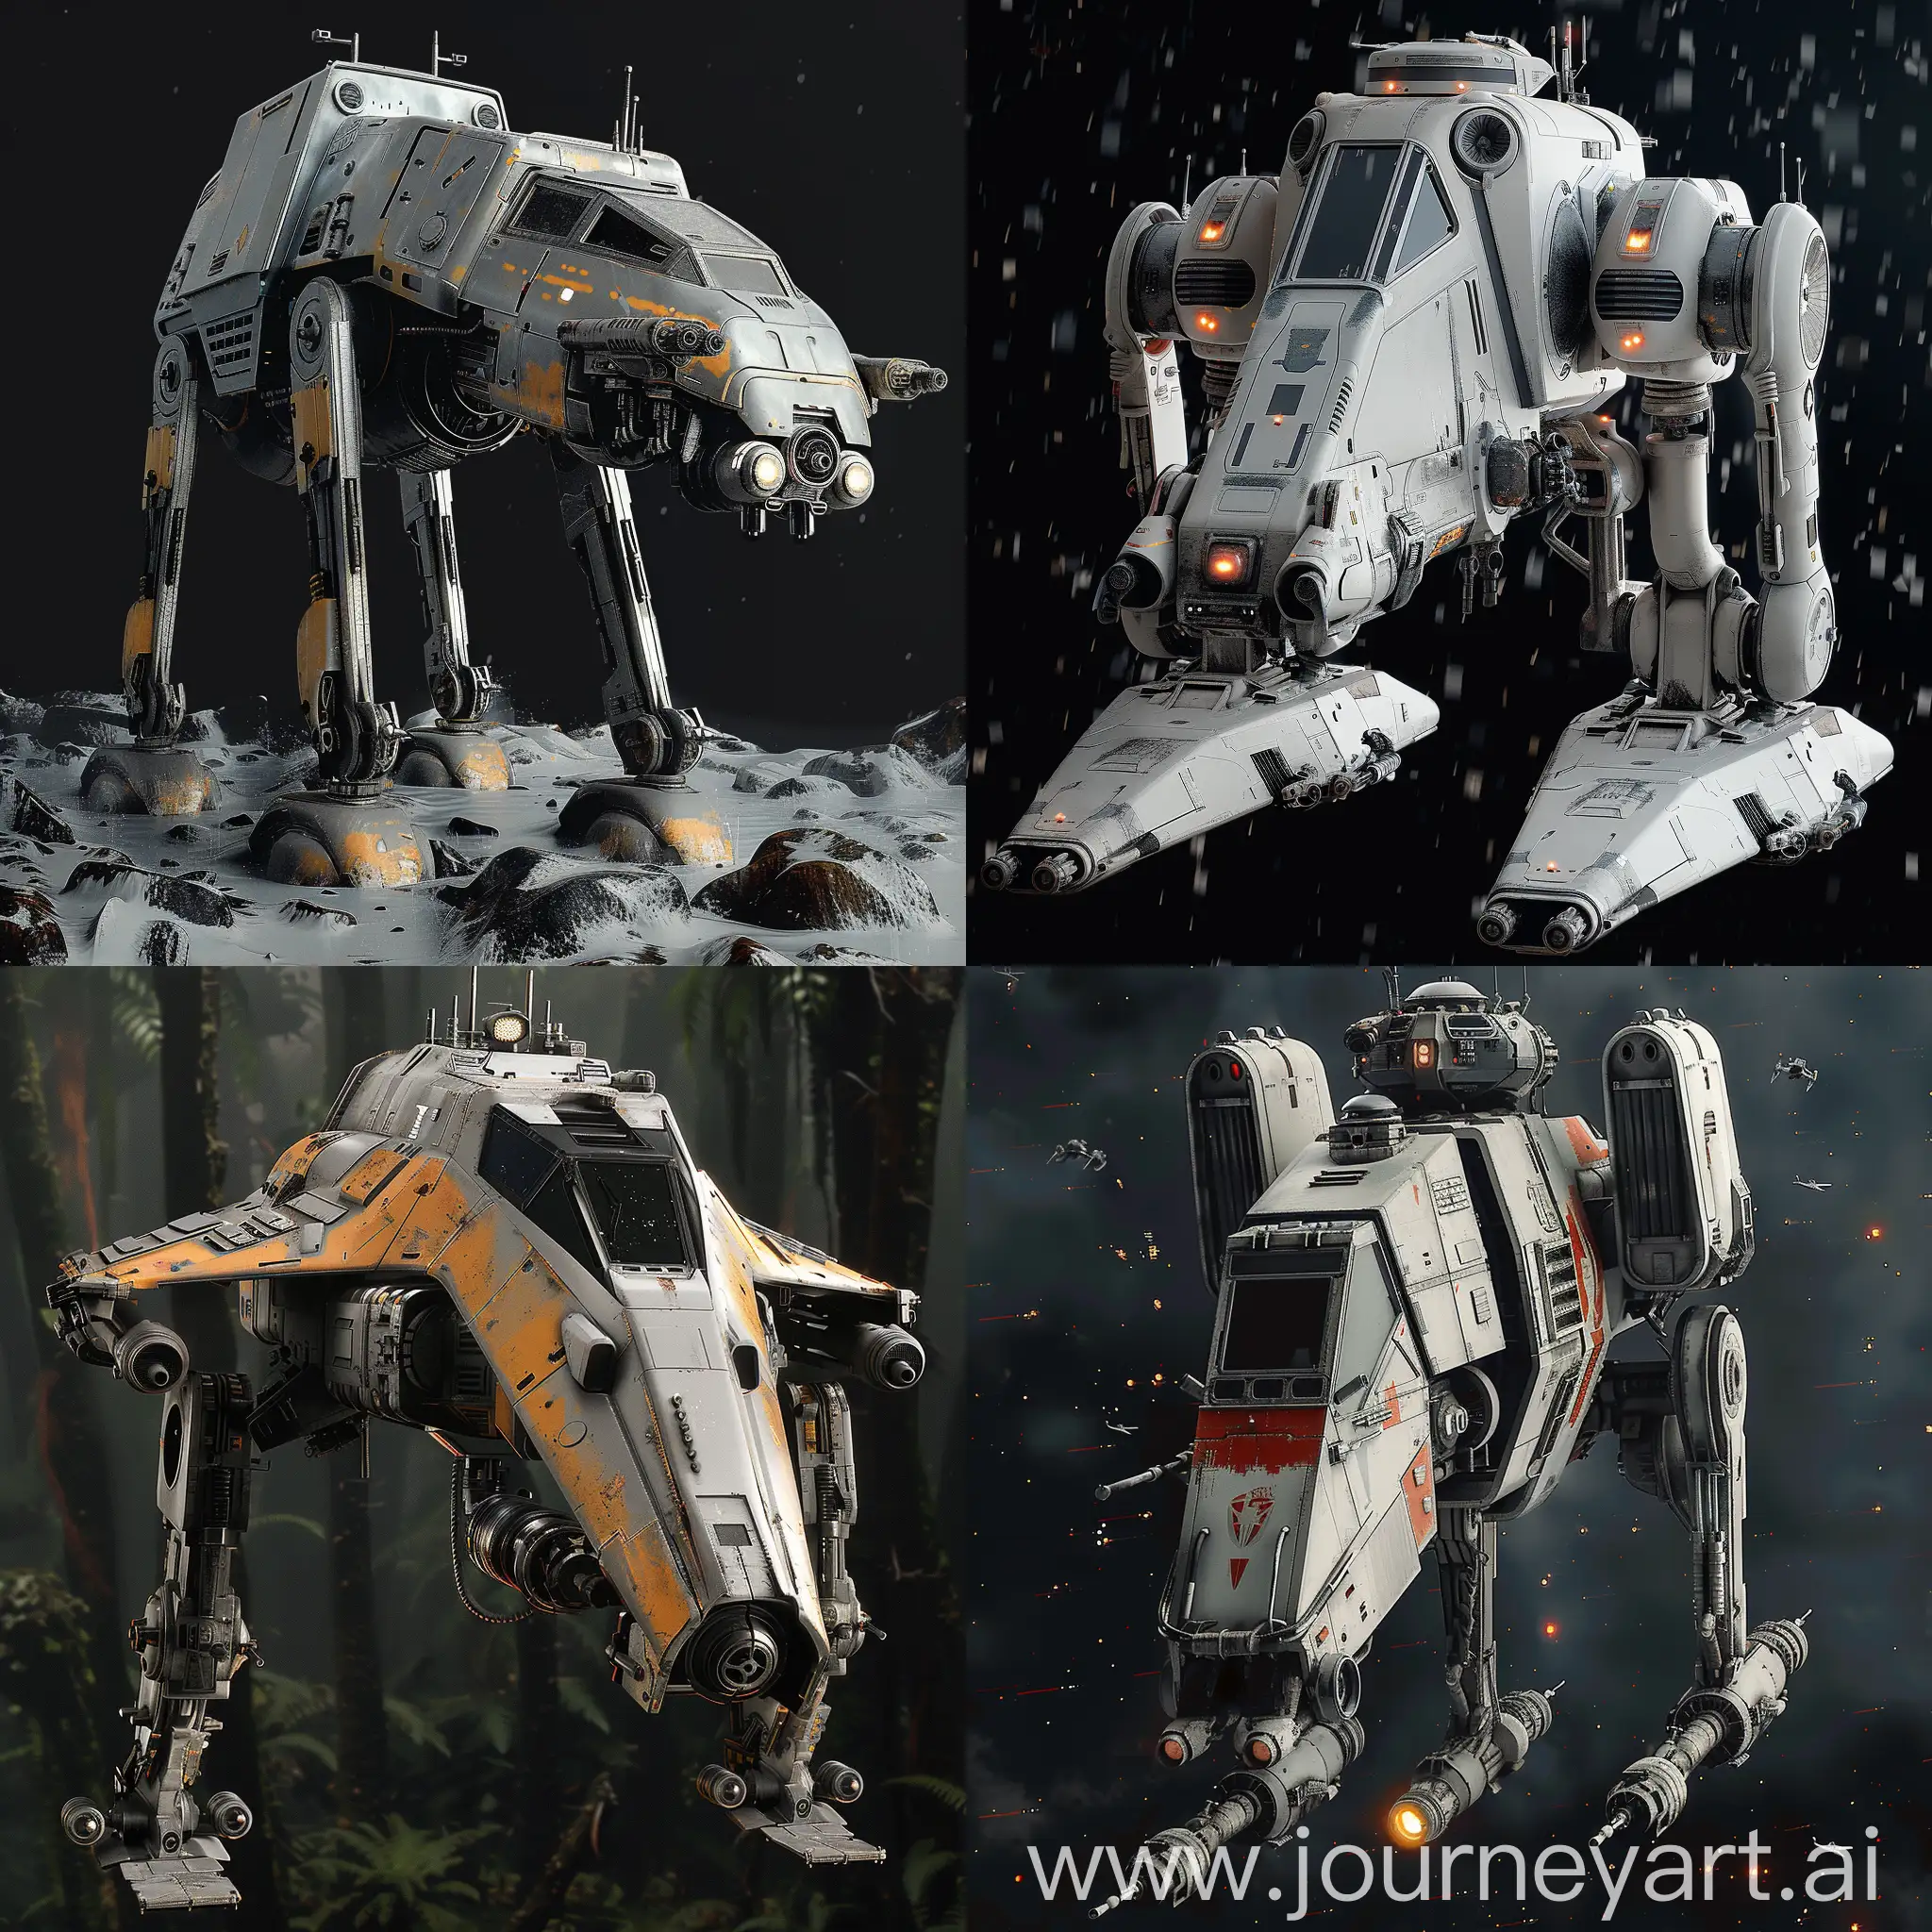 Futuristic-Star-Wars-All-Terrain-Scout-Transport-with-Advanced-AI-System-and-Energy-Shield-Technology